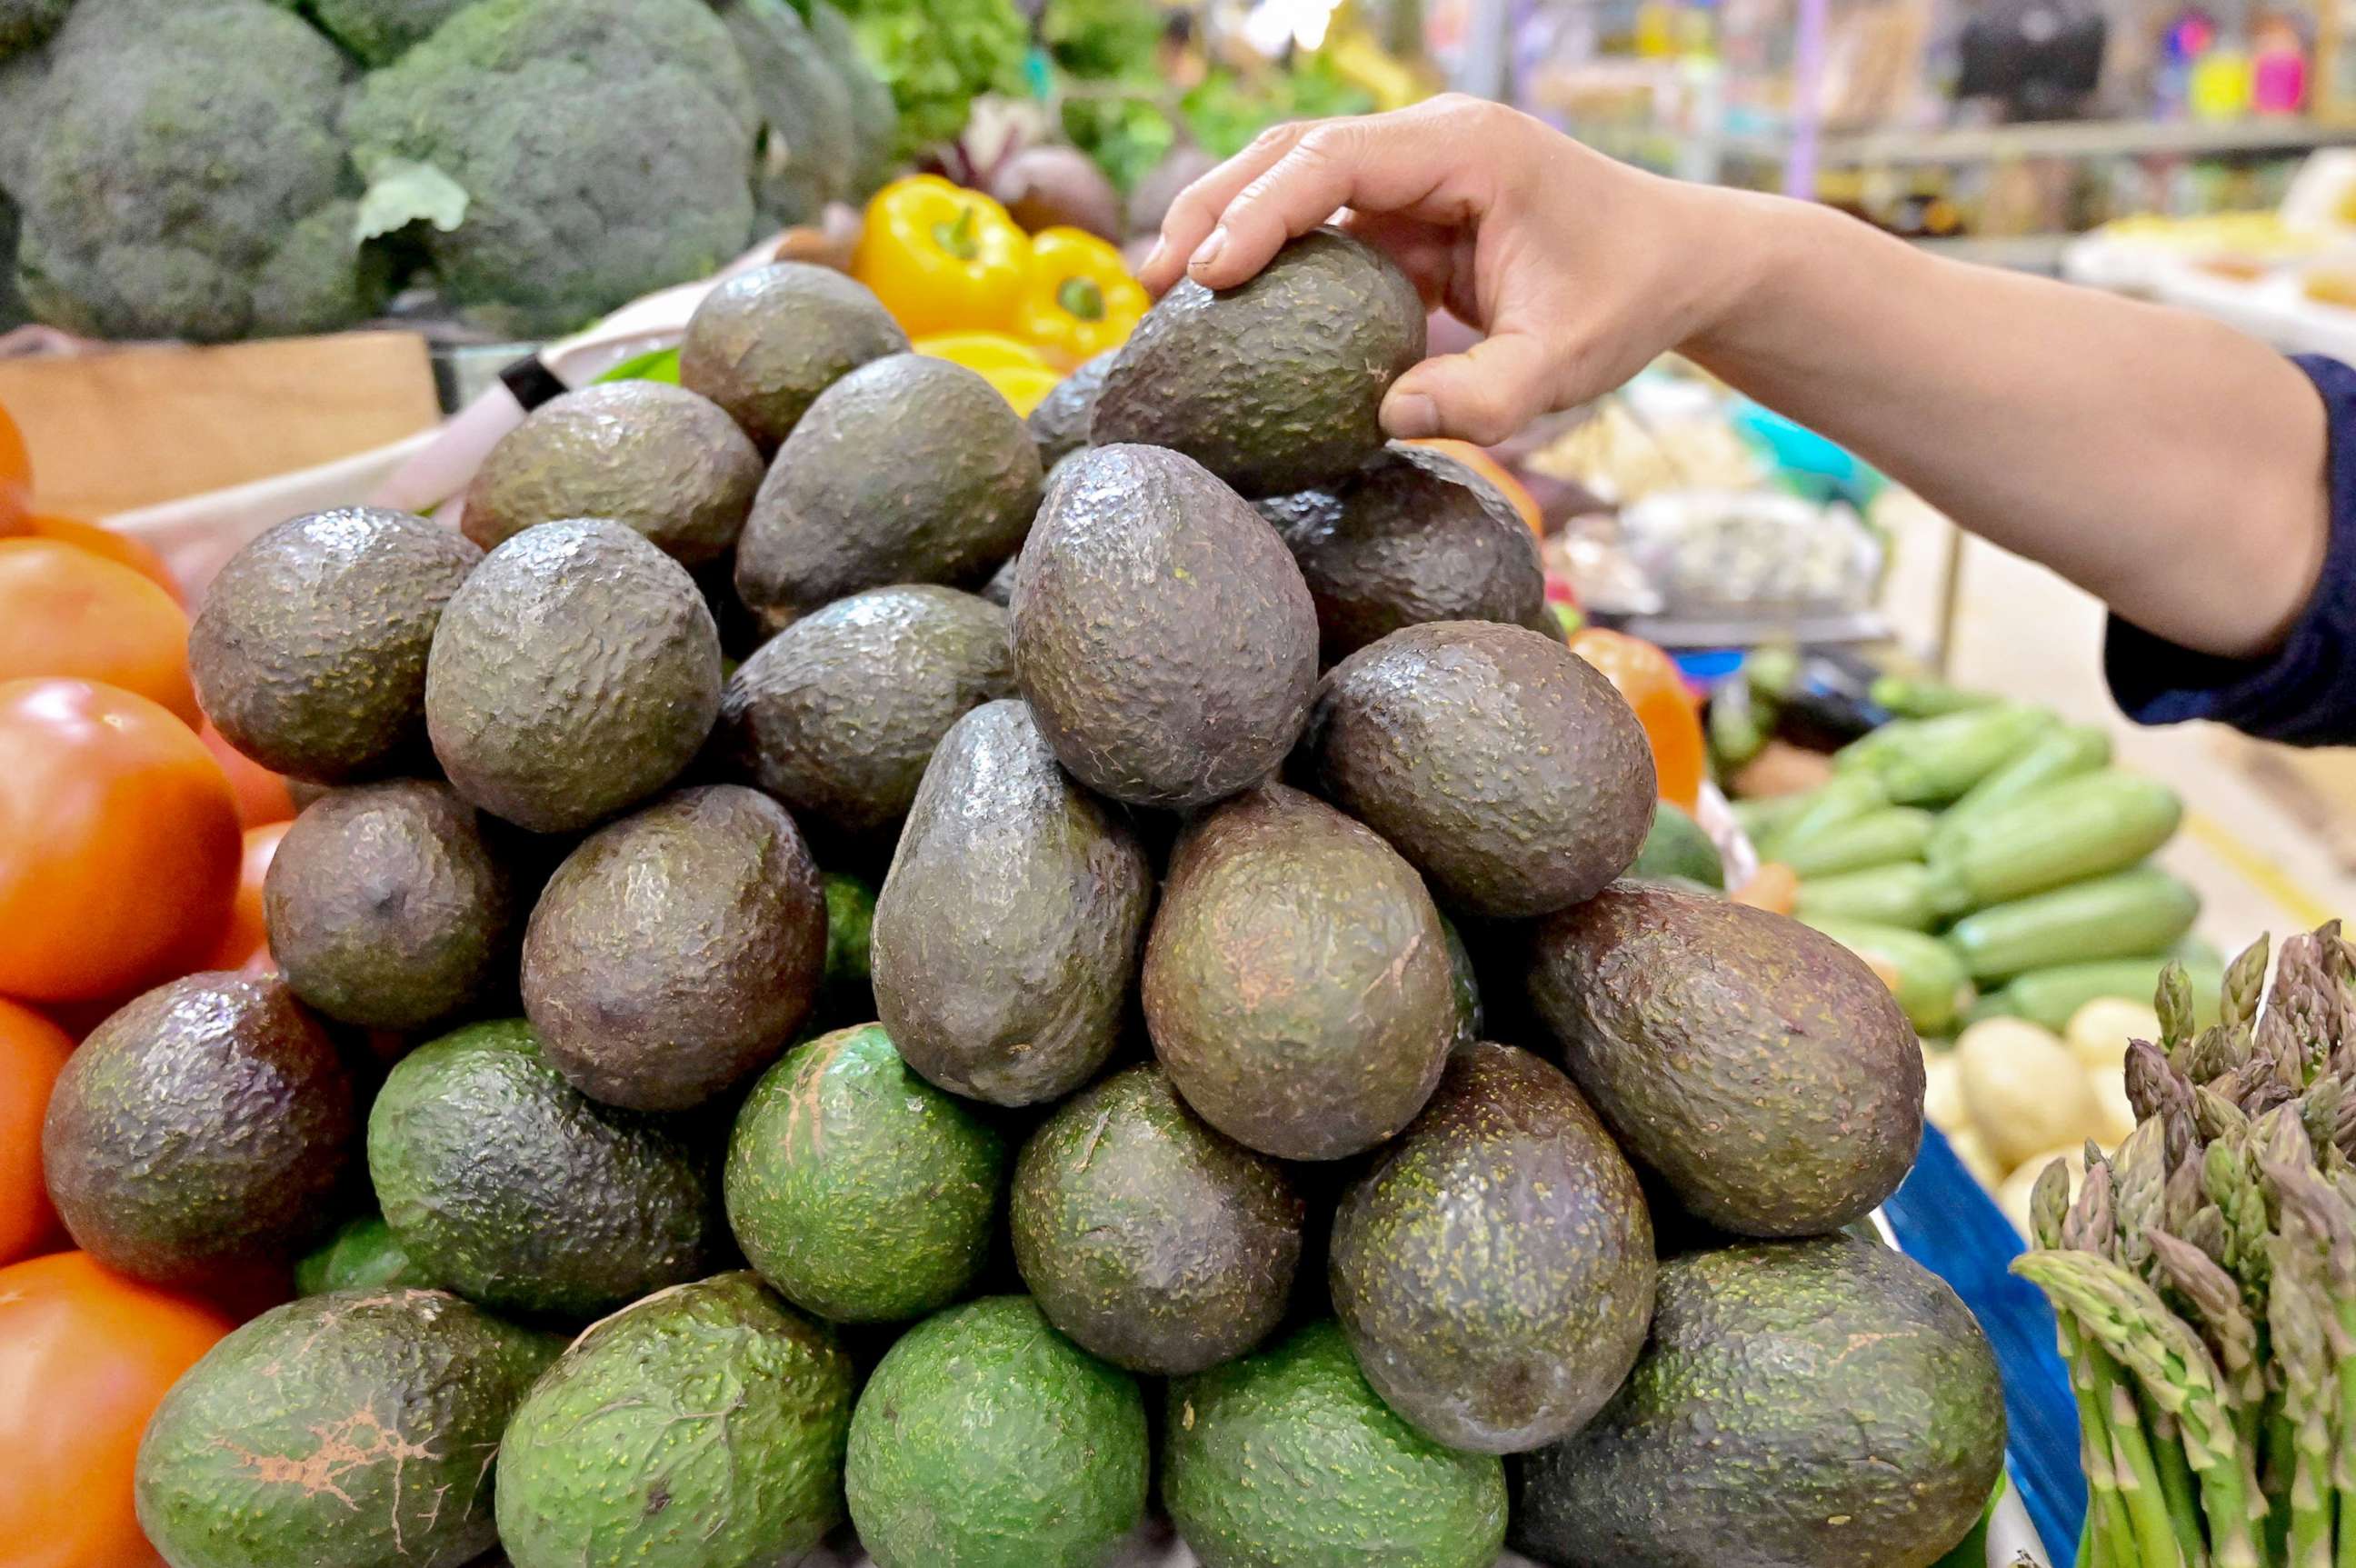 PHOTO: Mexican avocados are sold at a market in Mexico City, Feb. 15, 2022.